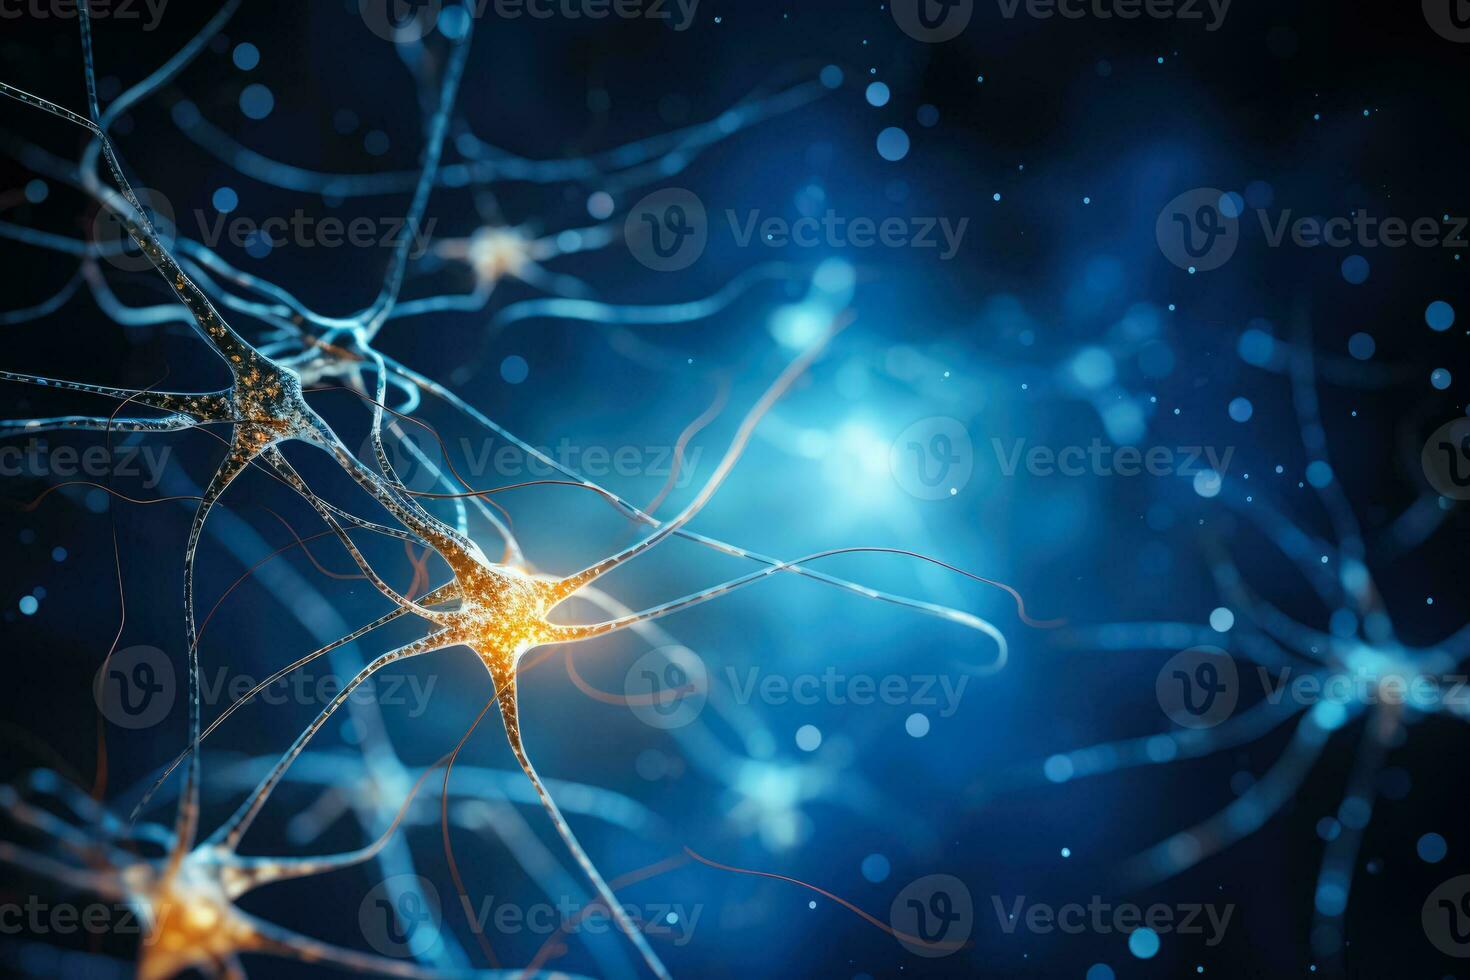 Neurons and synapse like stuctures depicting brain chemistry blue background photo